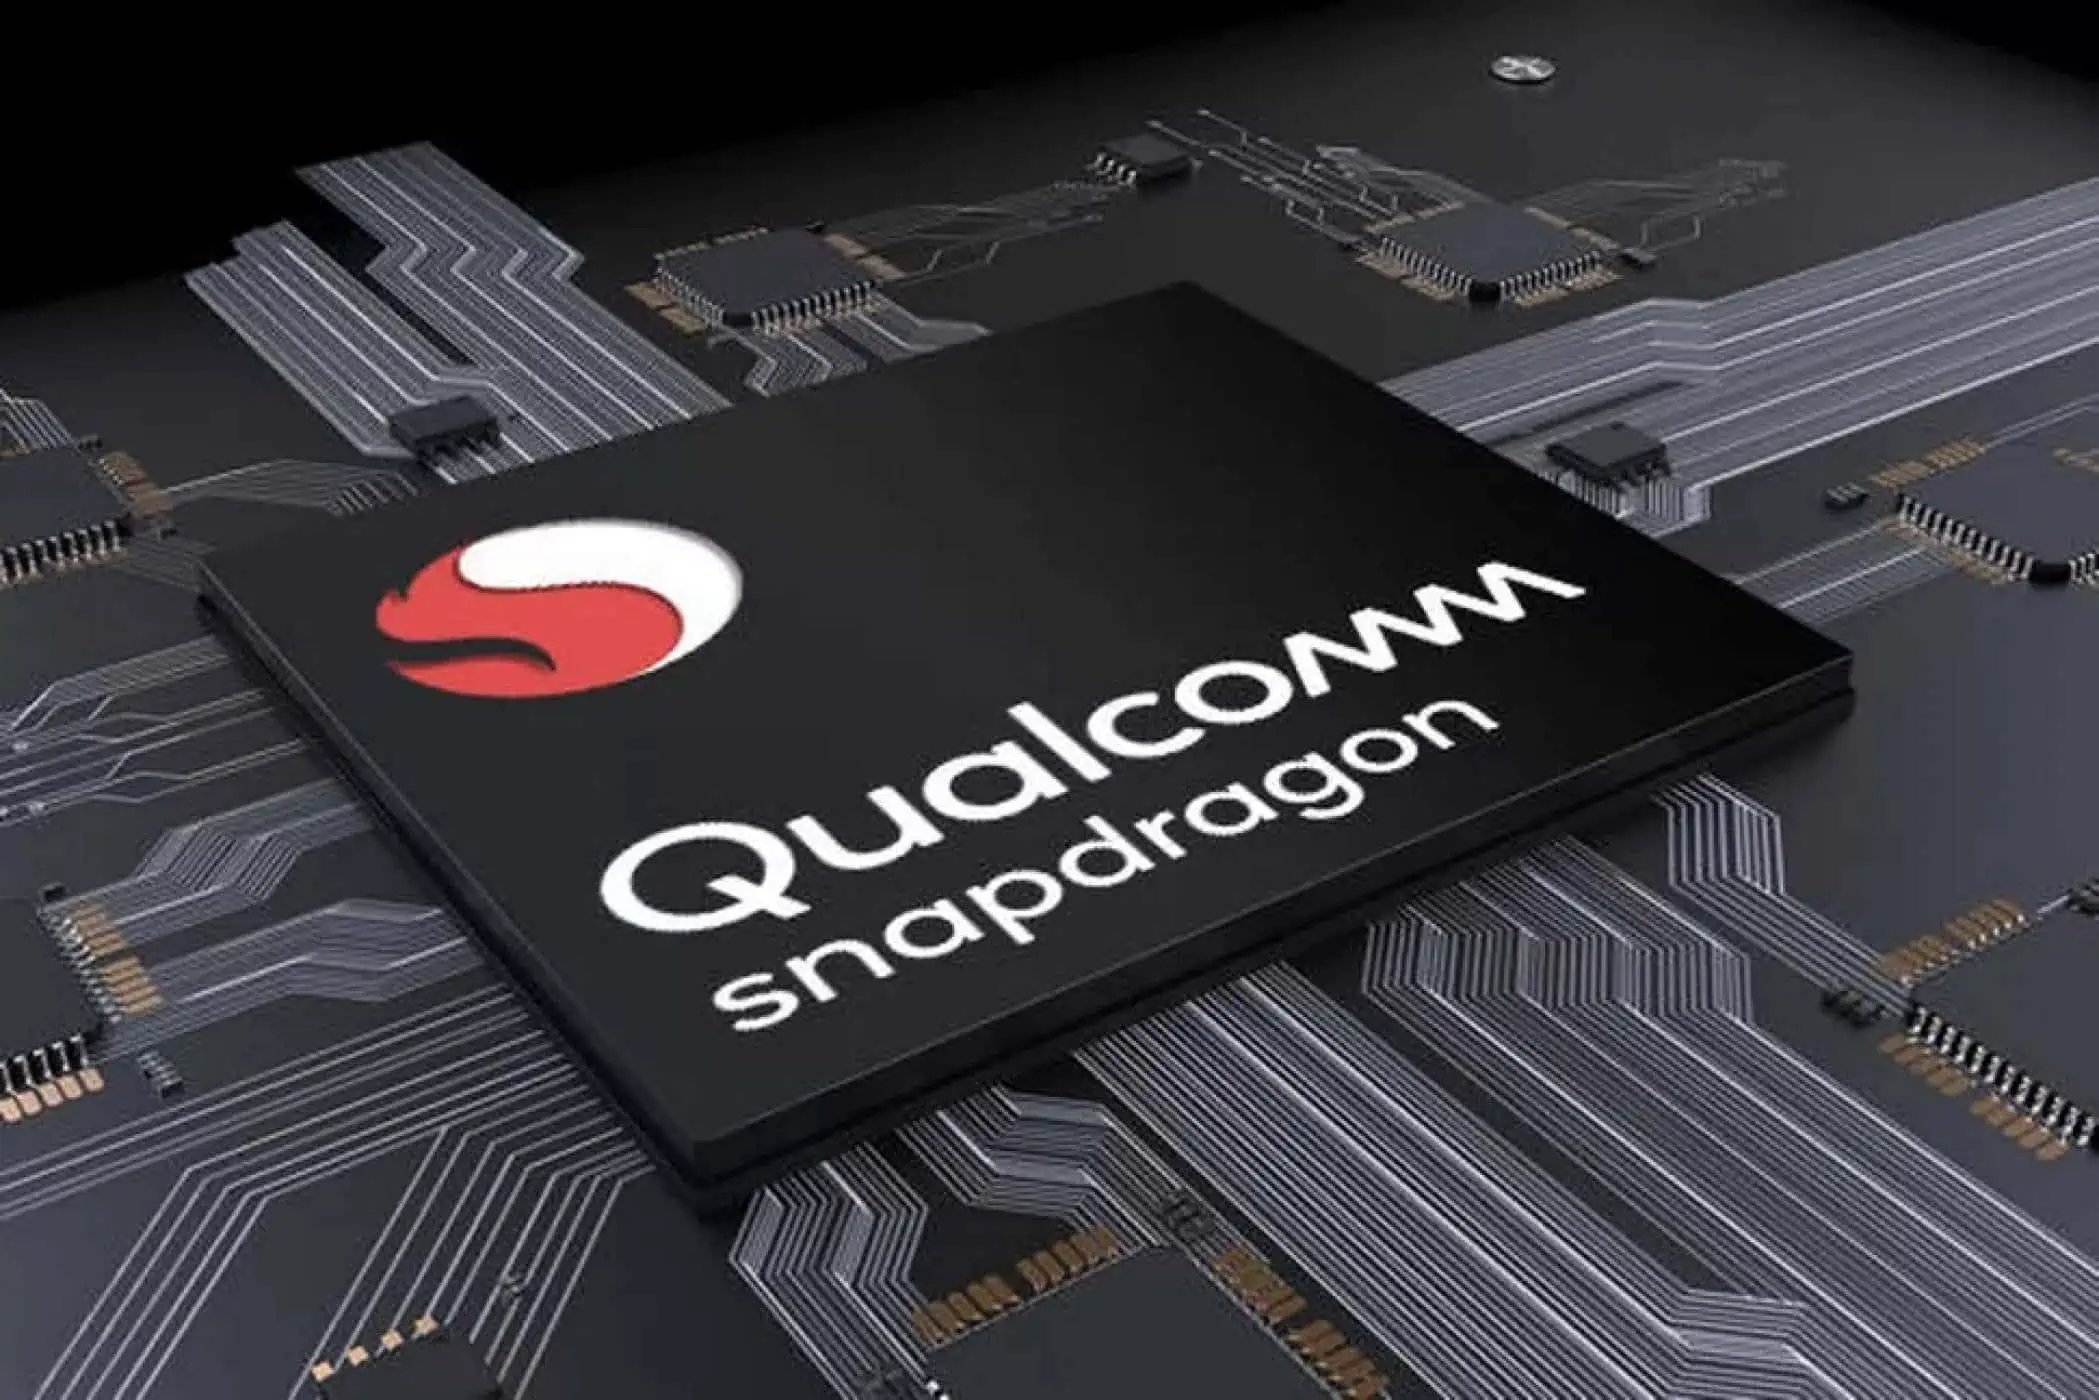 Qualcomm is developing a less powerful series of ARM processors for PCs